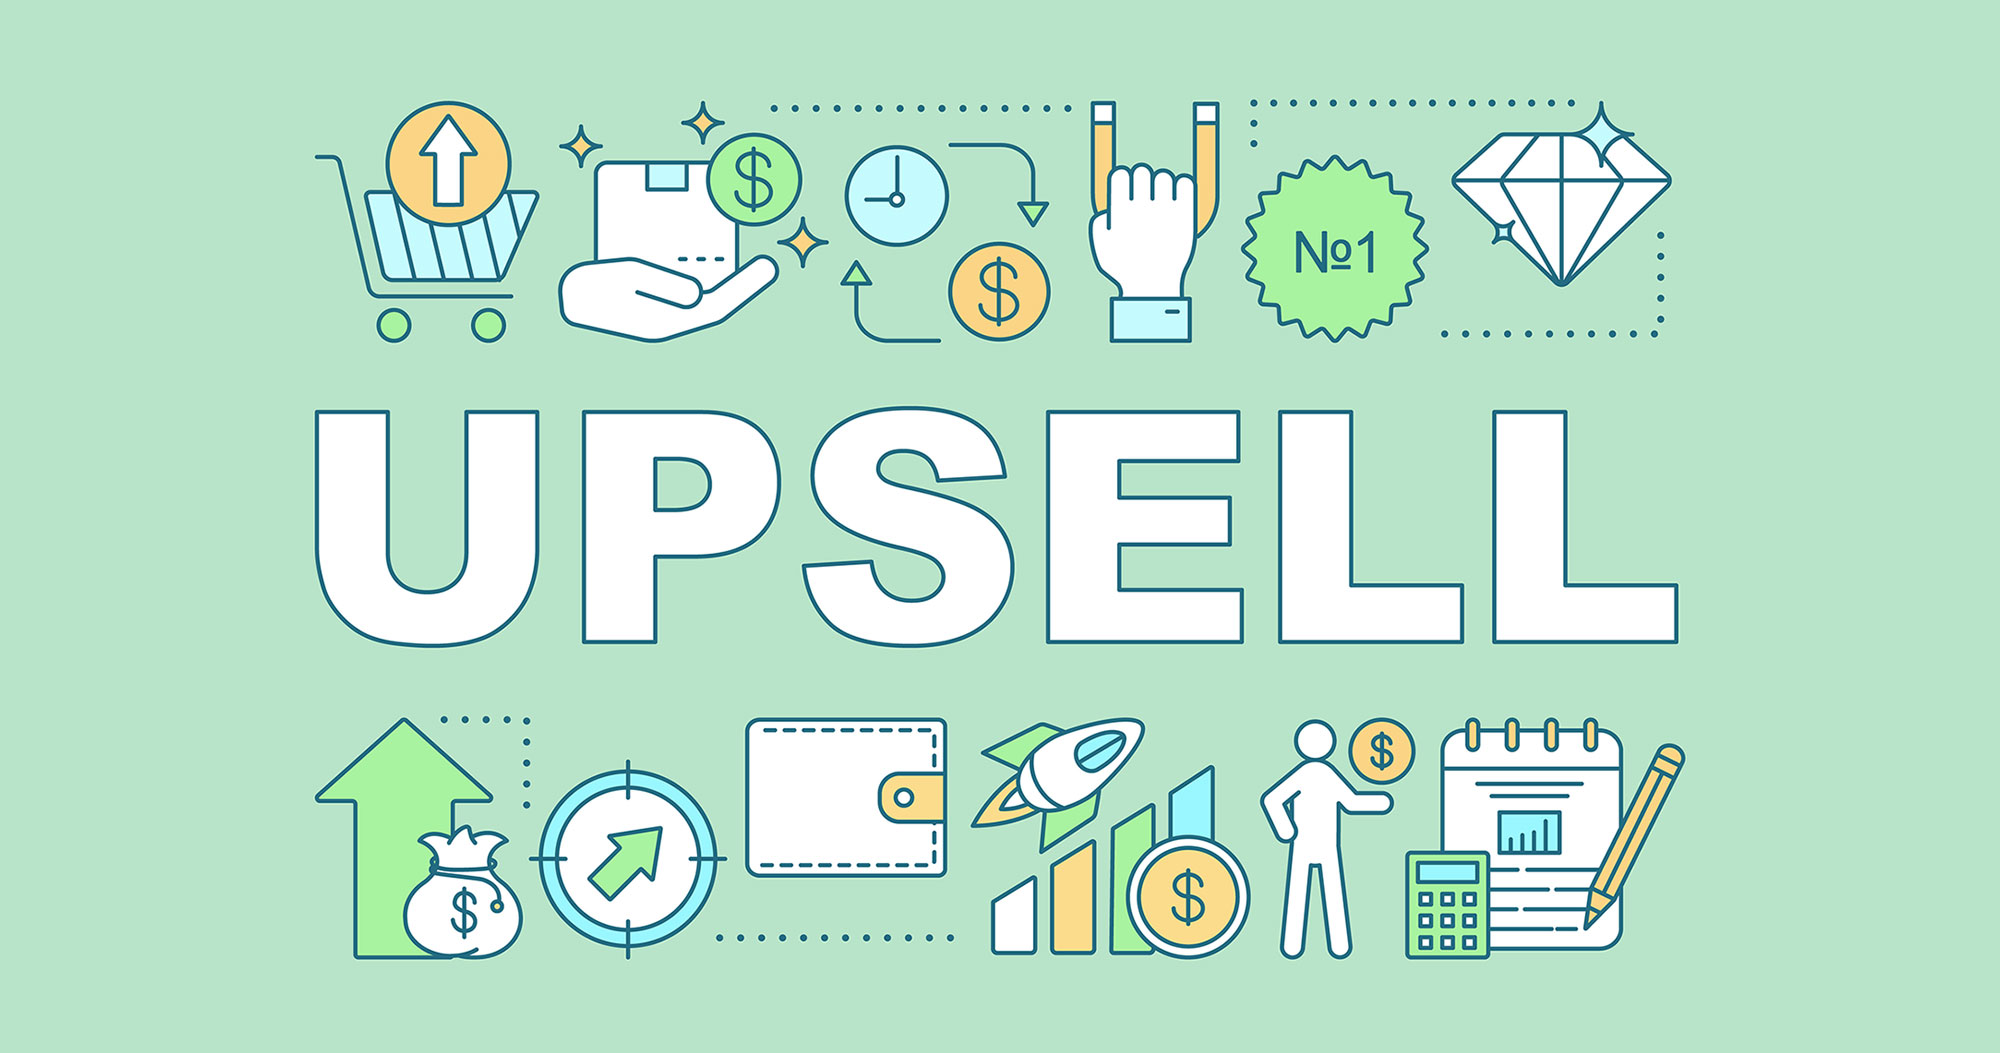 Upselling and Cross-Selling: Strategies to Maximize Customer LTV